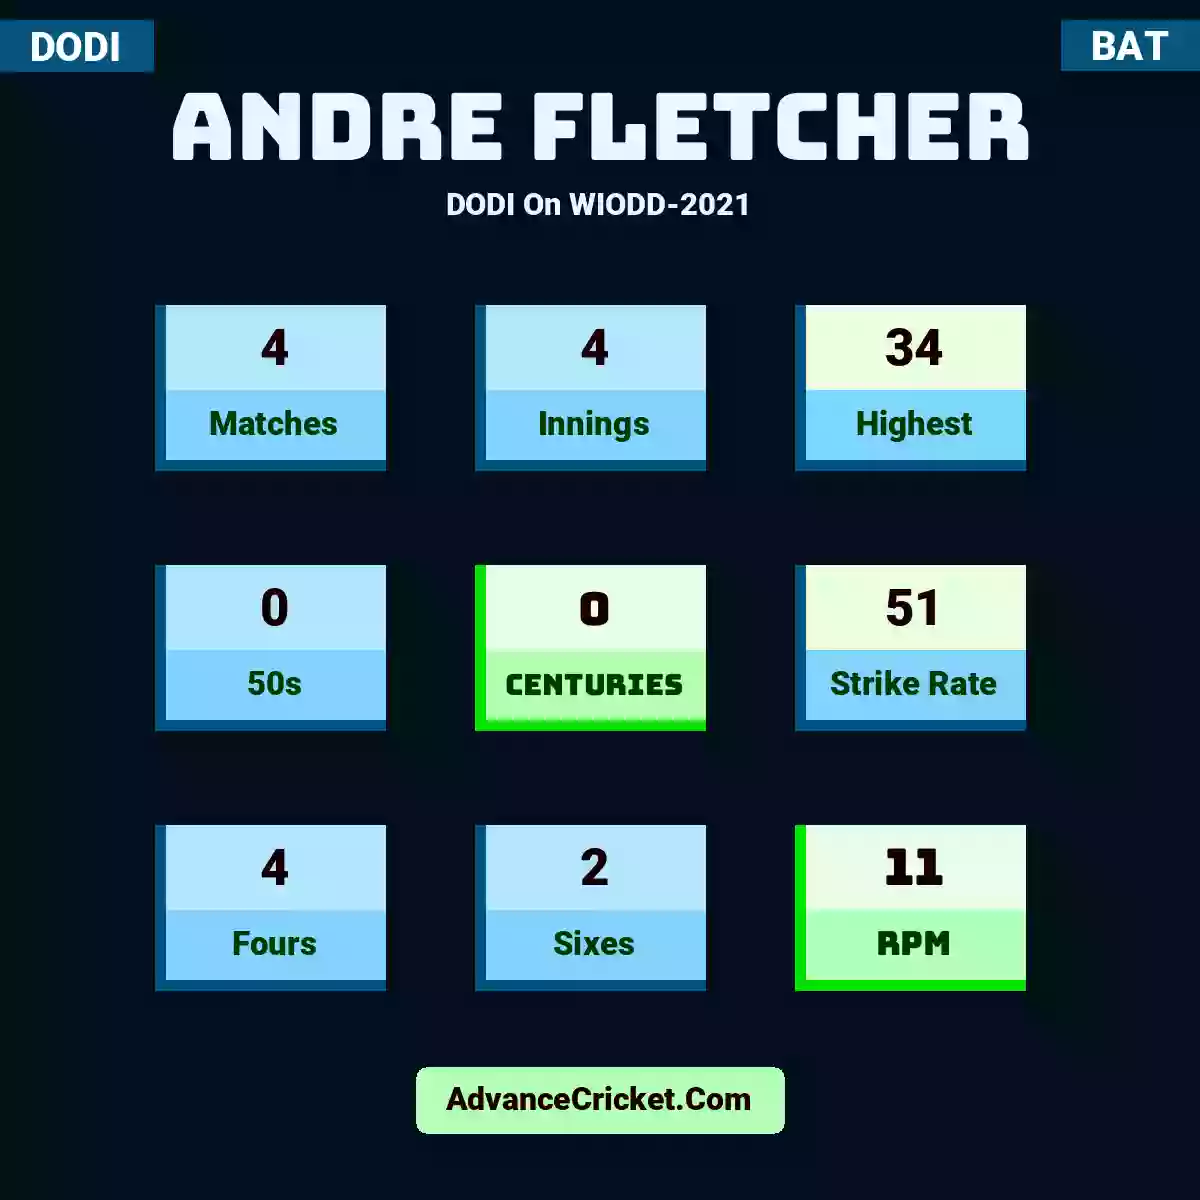 Andre Fletcher DODI  On WIODD-2021, Andre Fletcher played 4 matches, scored 34 runs as highest, 0 half-centuries, and 0 centuries, with a strike rate of 51. A.Fletcher hit 4 fours and 2 sixes, with an RPM of 11.